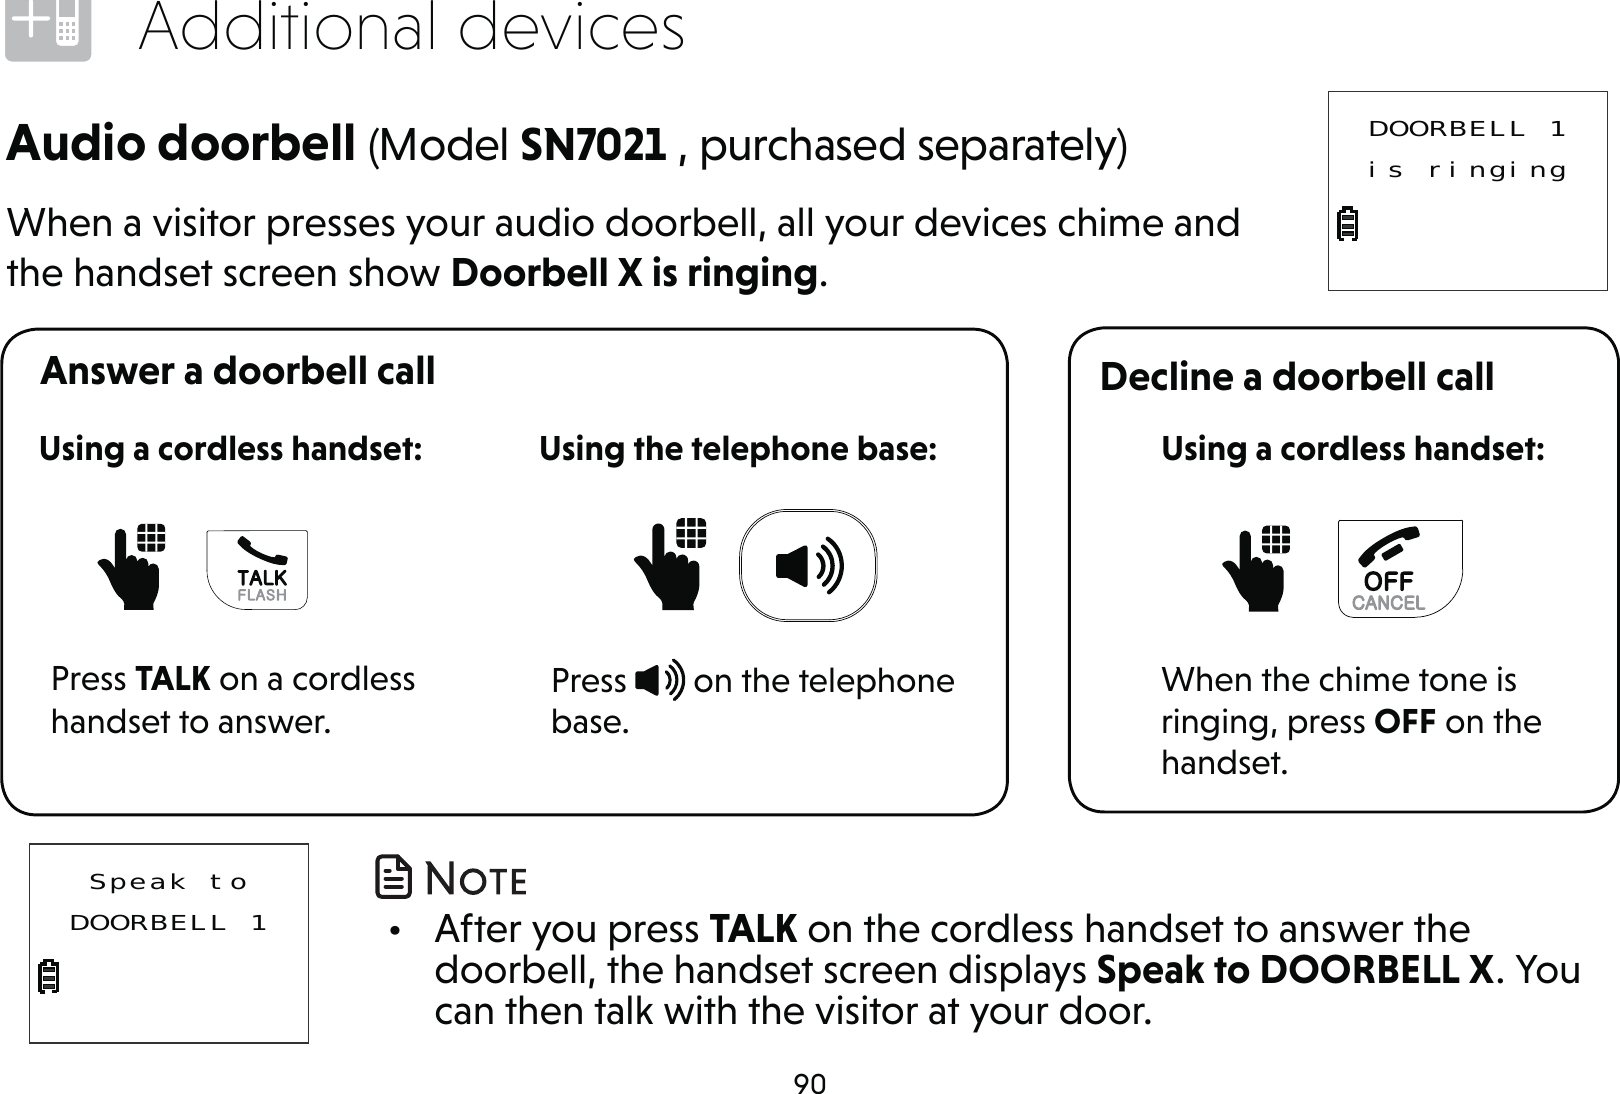 90Additional devicesAnswer a doorbell call Decline a doorbell callAudio doorbell (Model SN7021 , purchased separately)When a visitor presses your audio doorbell, all your devices chime and the handset screen show Doorbell X is ringing.When the chime tone is ringing, press OFF on the handset.Using a cordless handset:Press TALK on a cordless handset to answer.Using a cordless handset:Press   on the telephone base.   Using the telephone base:DOORBELL 1is ringingSpeak toDOORBELL 1 •  After you press TALK on the cordless handset to answer the doorbell, the handset screen displays Speak to DOORBELL X. You can then talk with the visitor at your door.